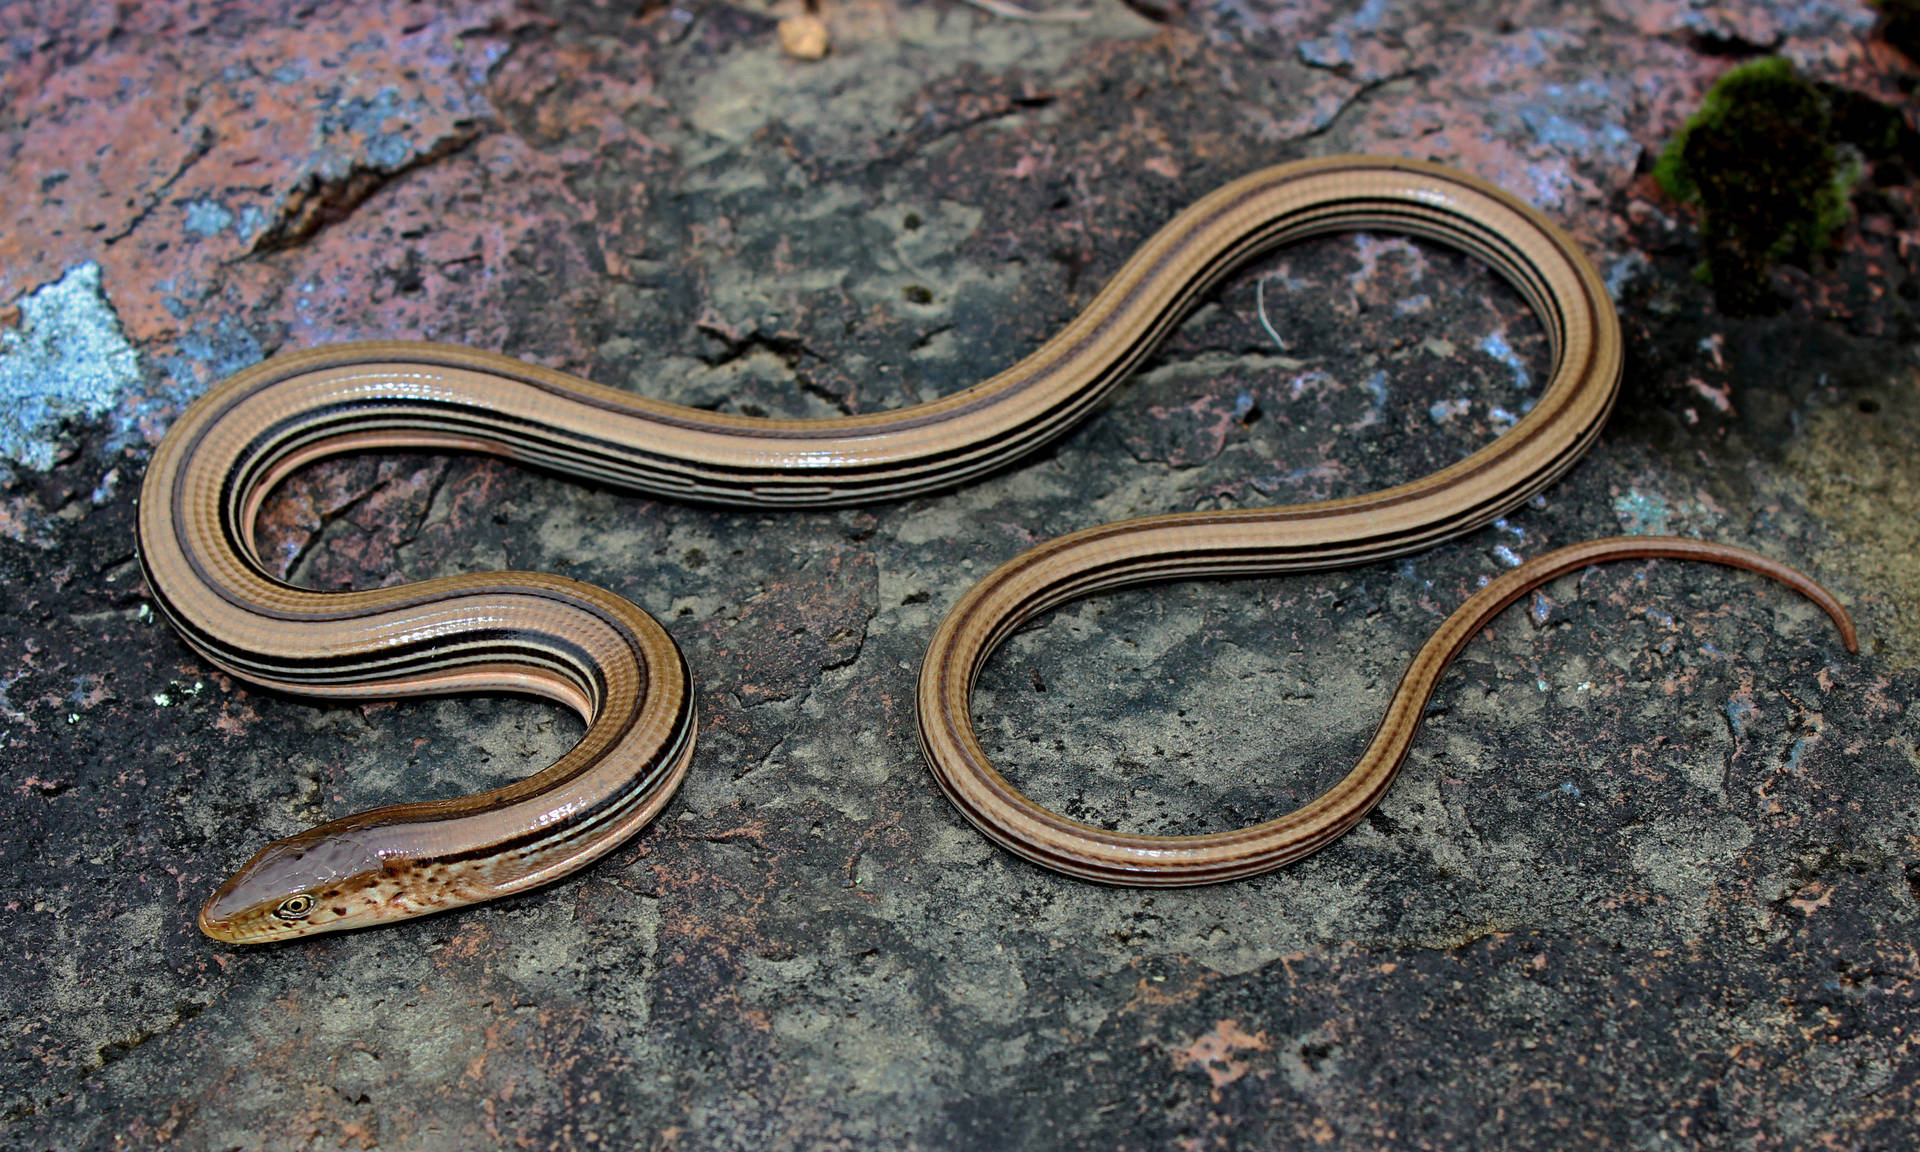 Slender Glass Lizard Curled Up On The Ground Wallpaper